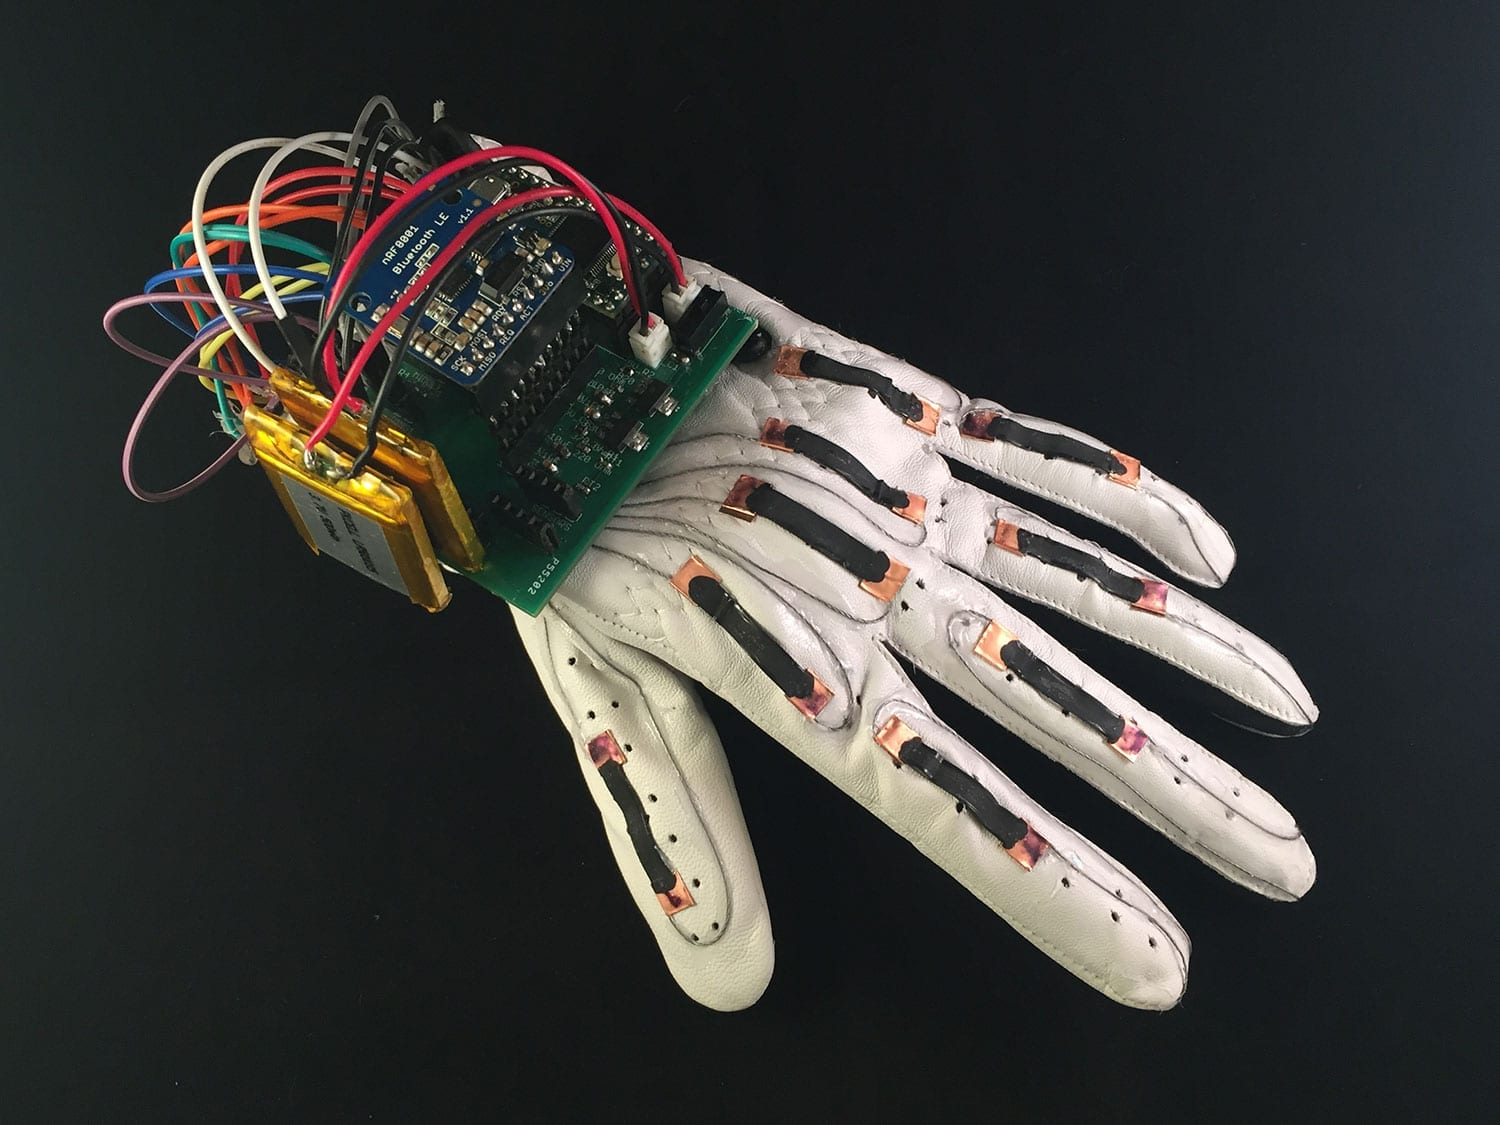 A smart glove wirelessly translates the American Sign Language alphabet into text